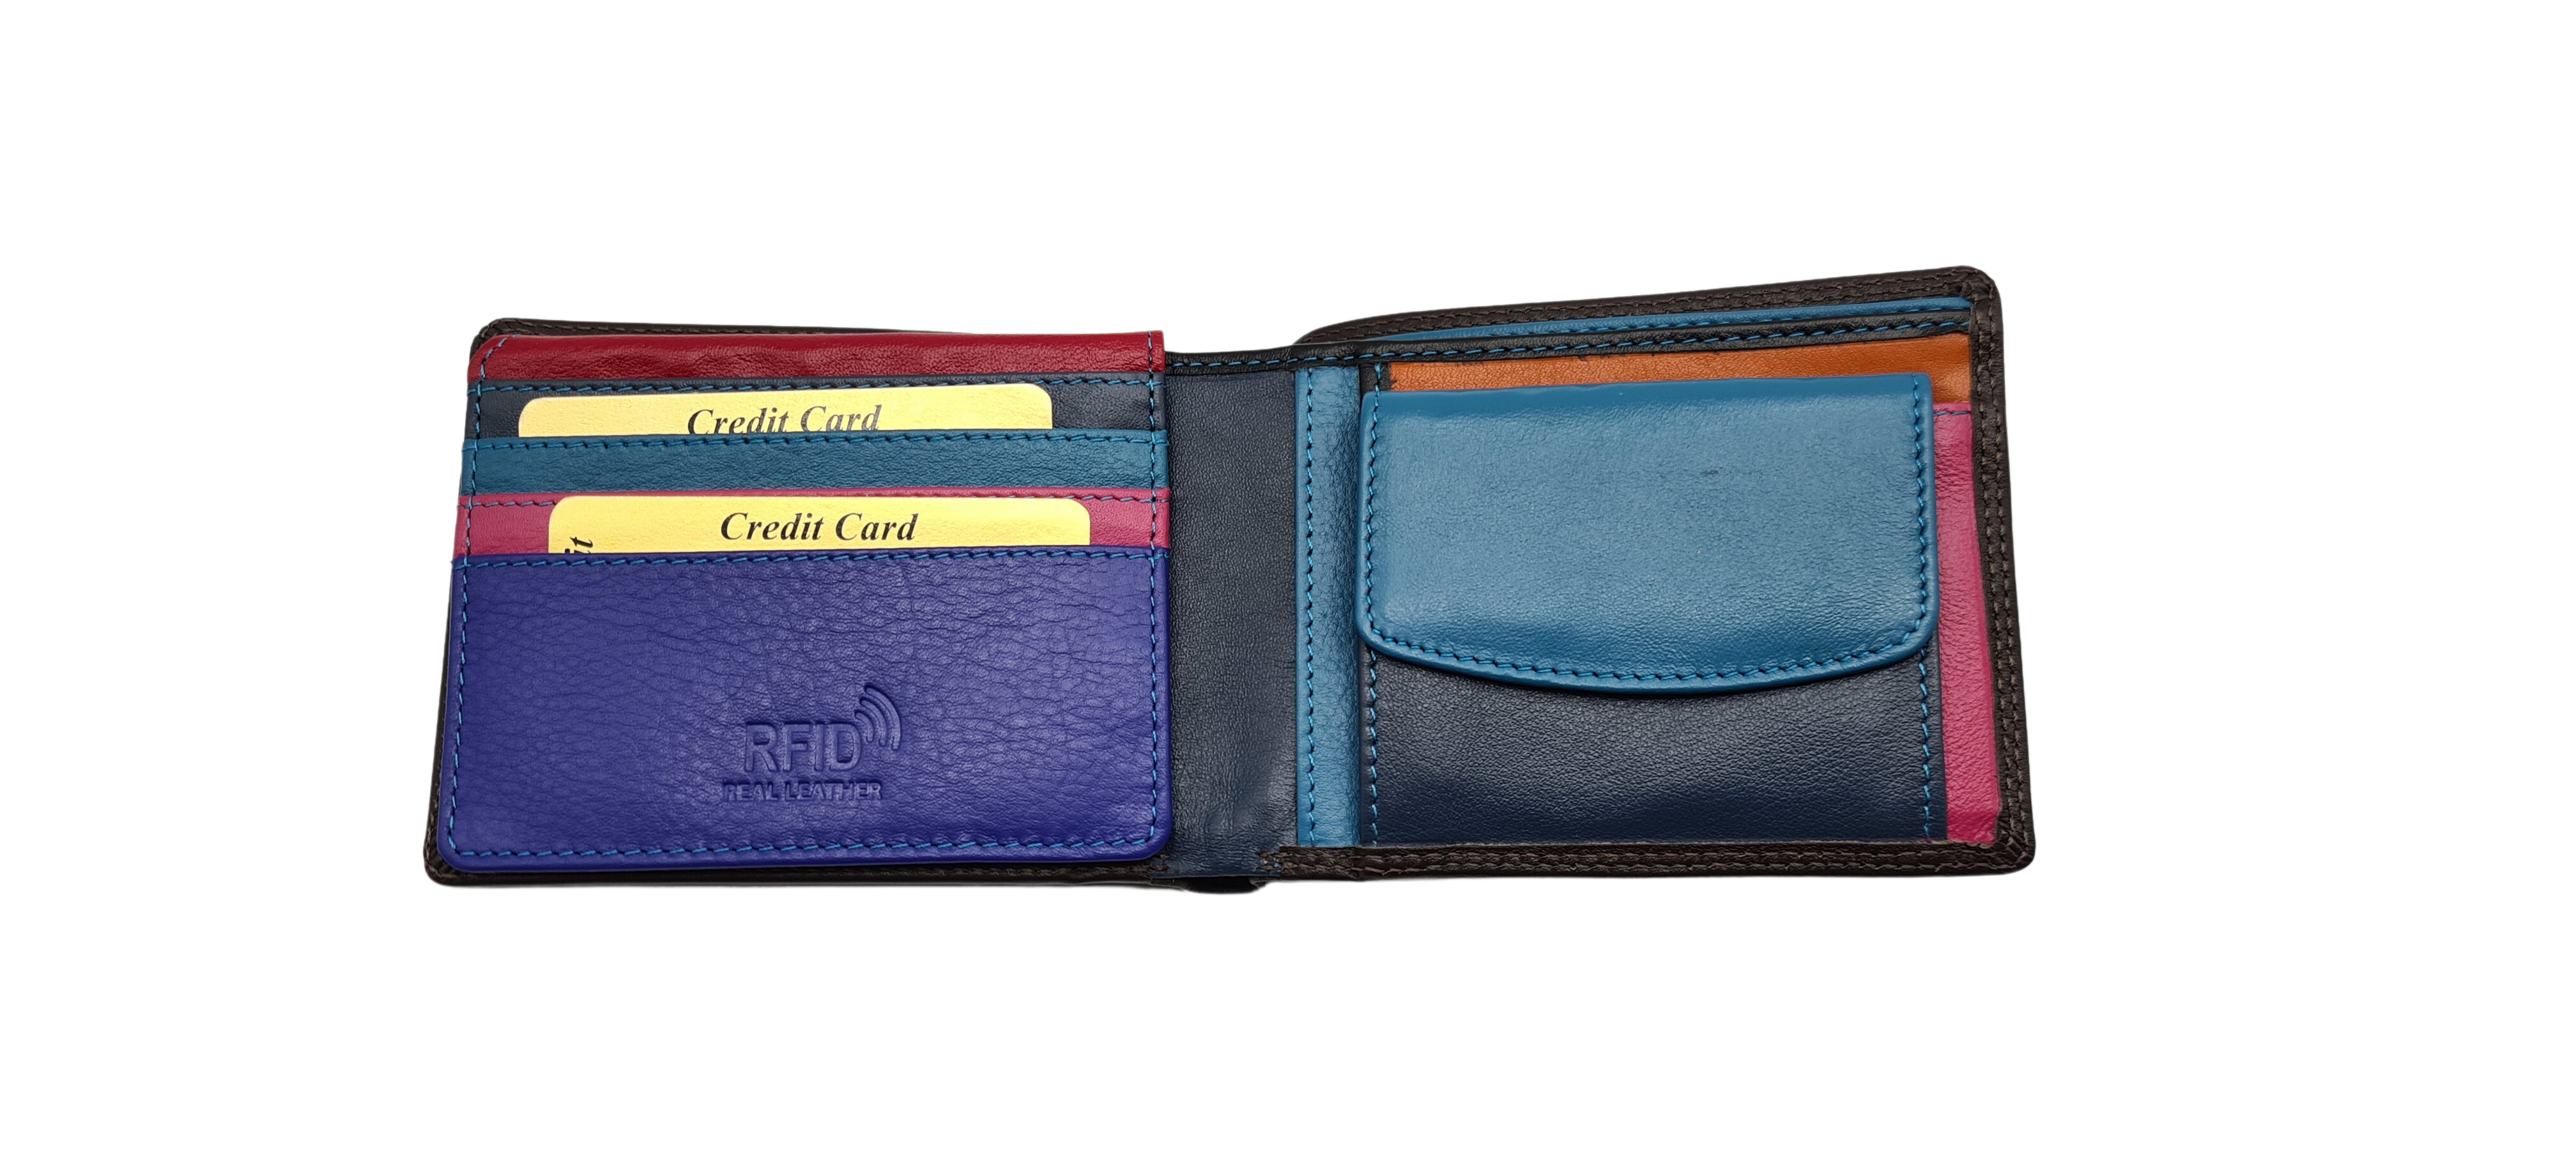 Migant Design Multicolor leather wallet with RFID protection coin case 10 card slot and 2 note compartment - Migant